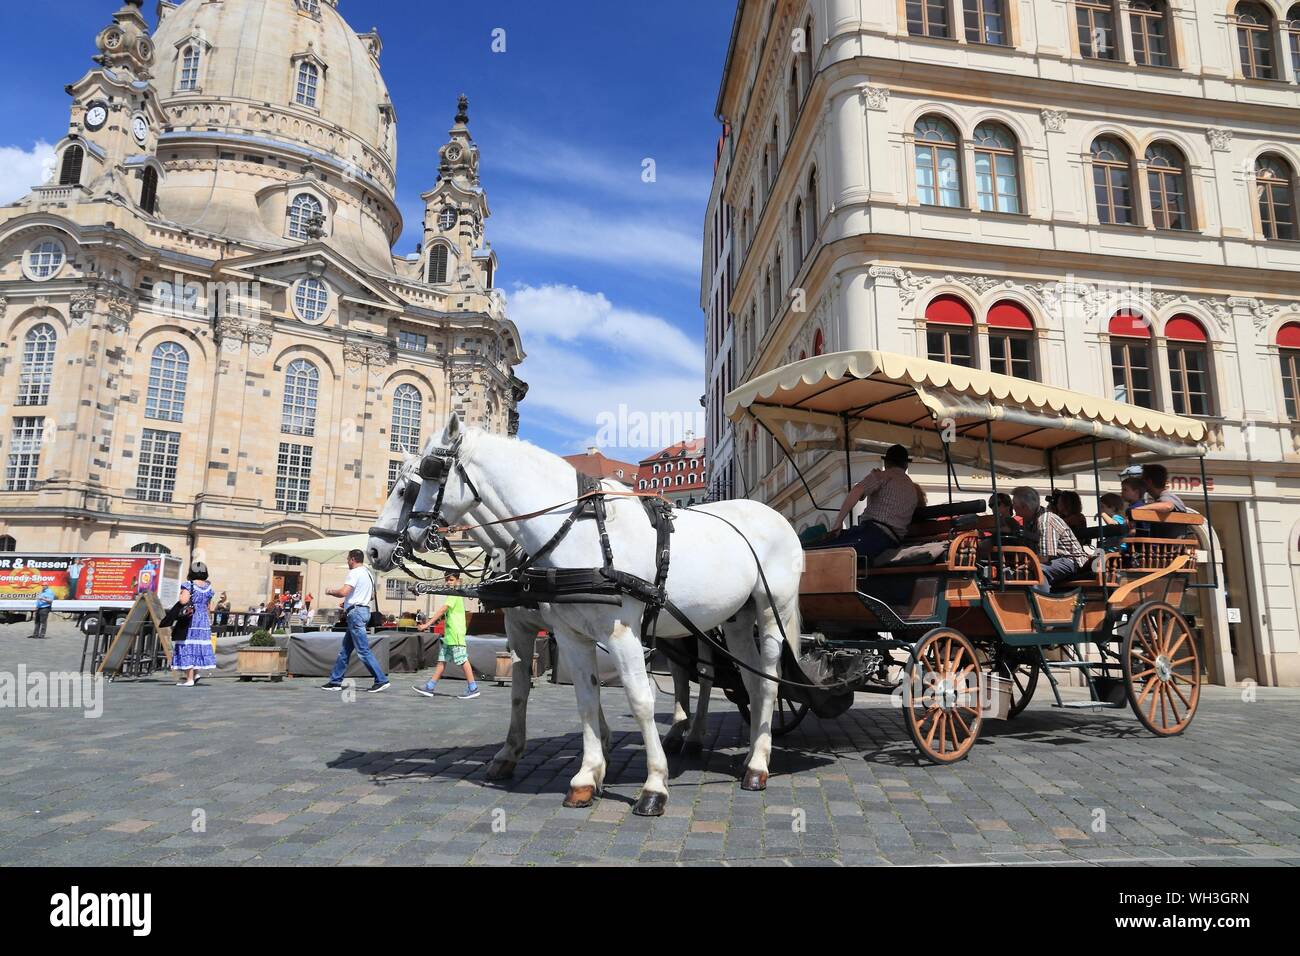 DRESDEN, GERMANY - MAY 10, 2018: Horse carriage ride at Neumarkt square in Altstadt (Old Town) district of Dresden, the 12th biggest city in Germany. Stock Photo